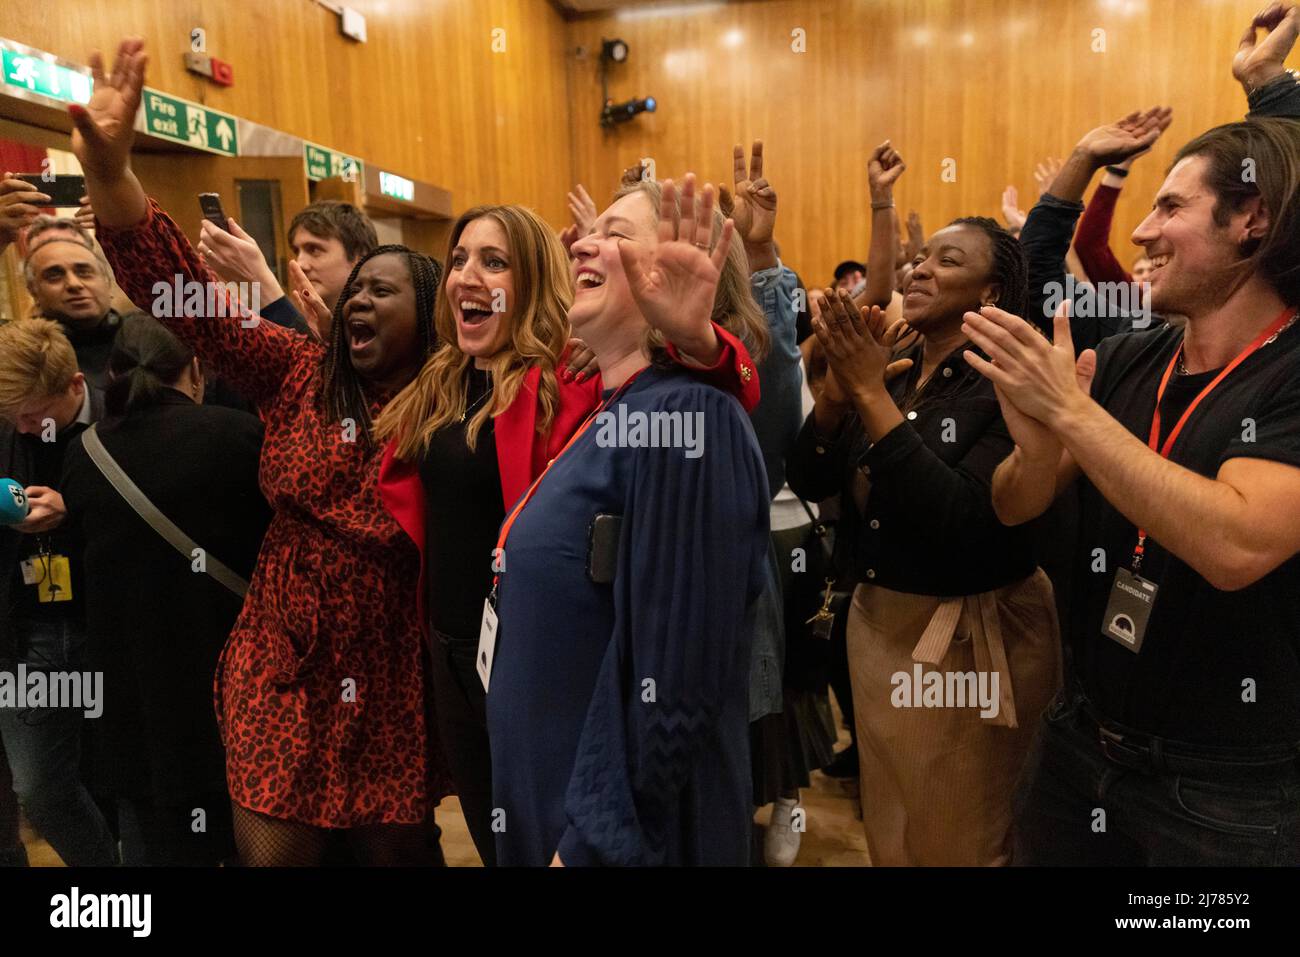 Wandsworth, Southwest London, UK. 6th May 2022. Labour councillors and activists including Dr Rosena Allin-Khan MP, celebrate as Labour candidate Simon Hogg wins the Wandsworth Council seat ahead of Ravi Govindia, Conservative Council, the first time Wandsworth Council has been held by Labour in 40 years. Credit: Jeff Gilbert/Alamy Live News Stock Photo